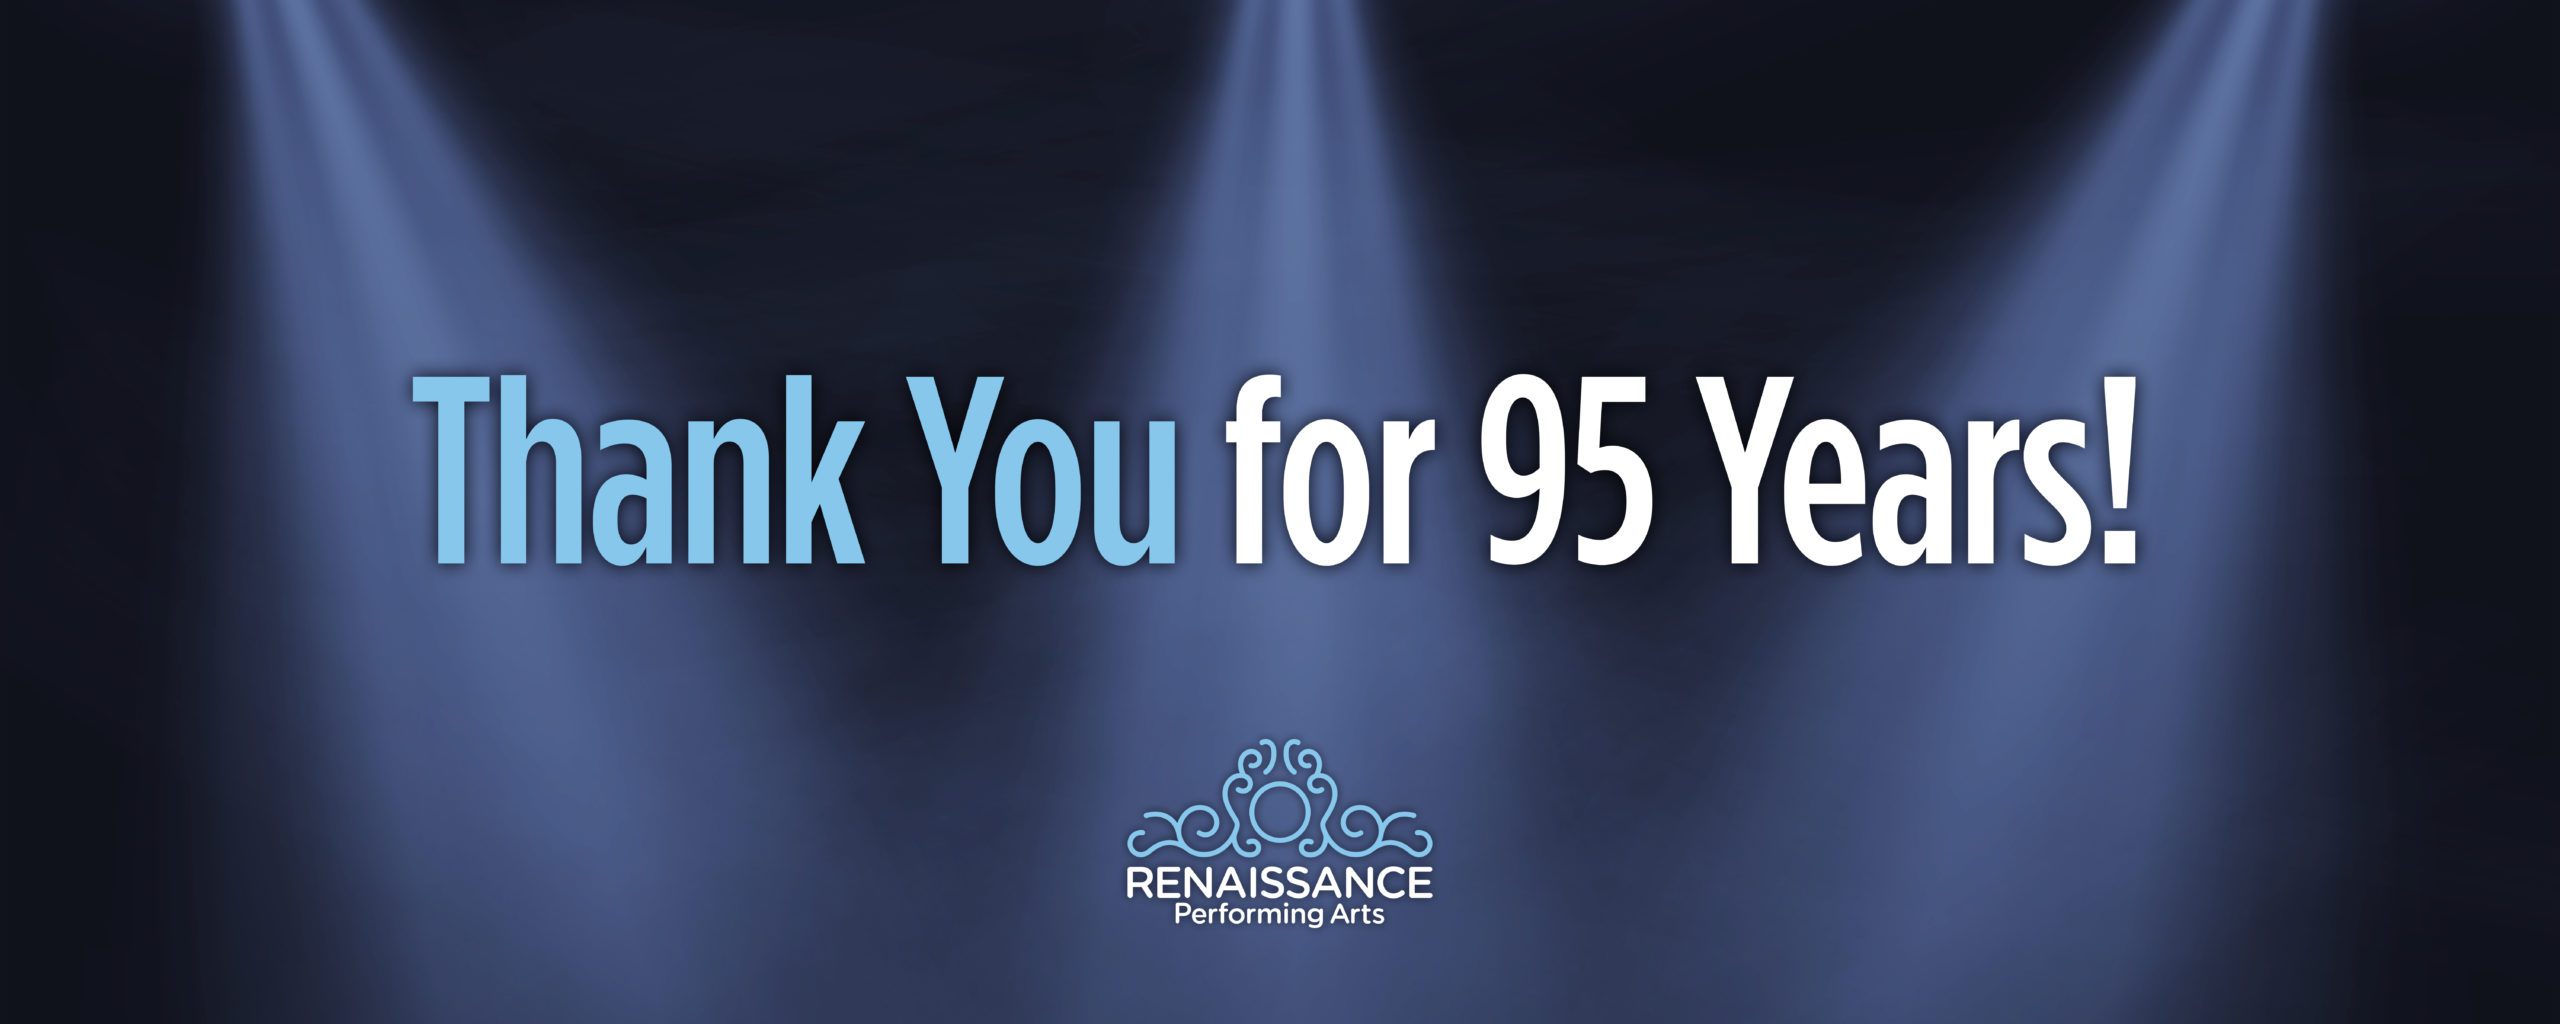 Thank You for 95 Years!